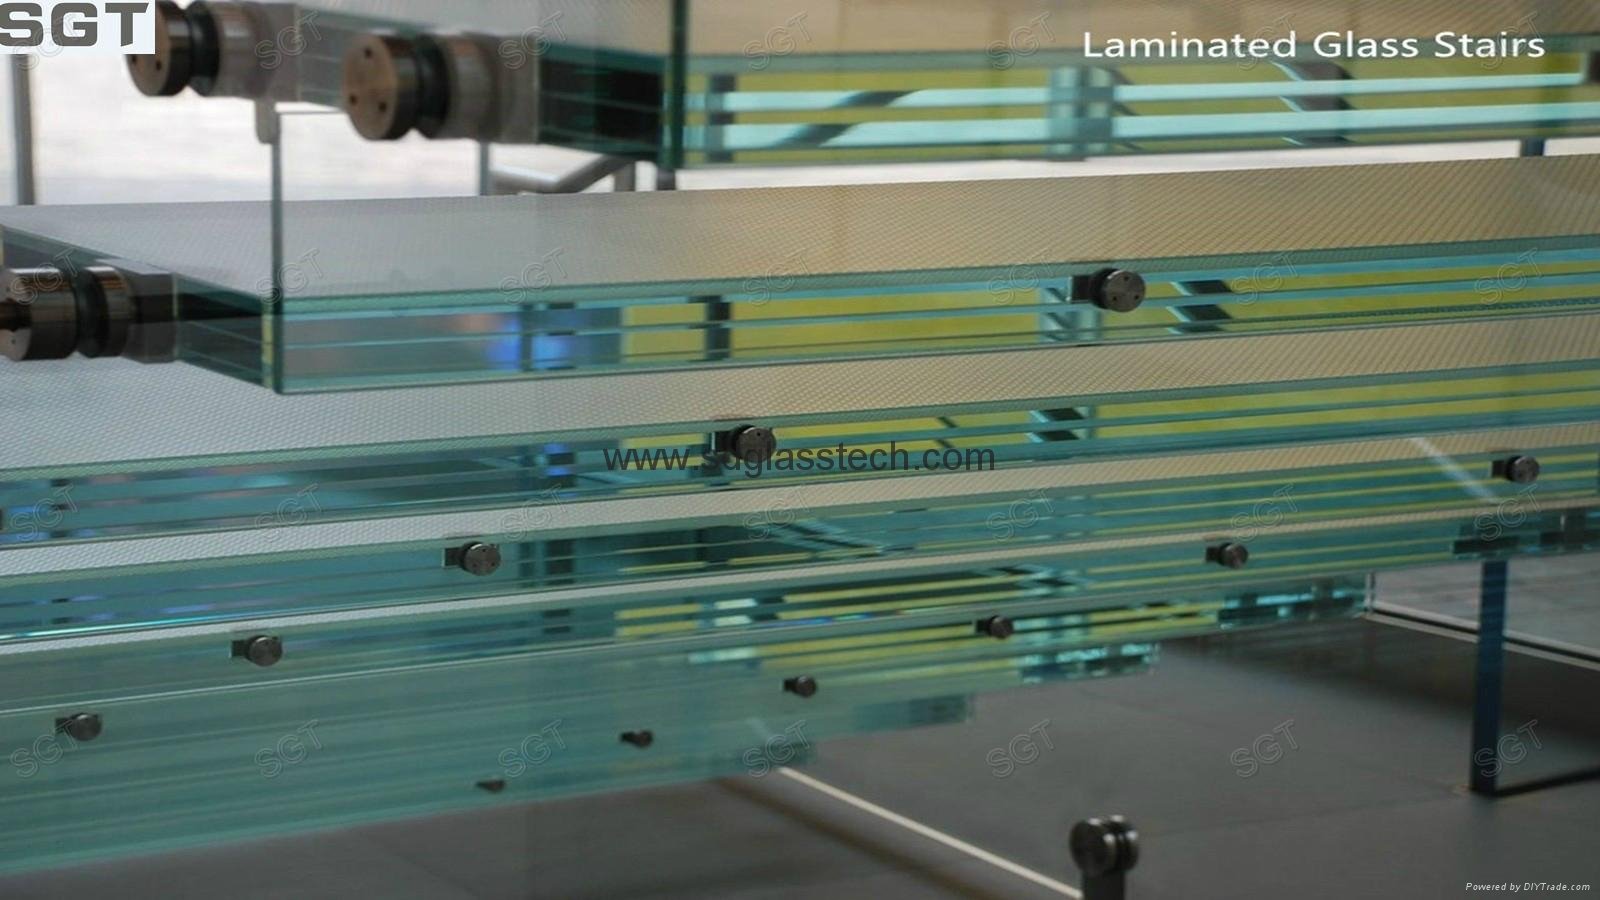 high quality laminated glass with CSI 3